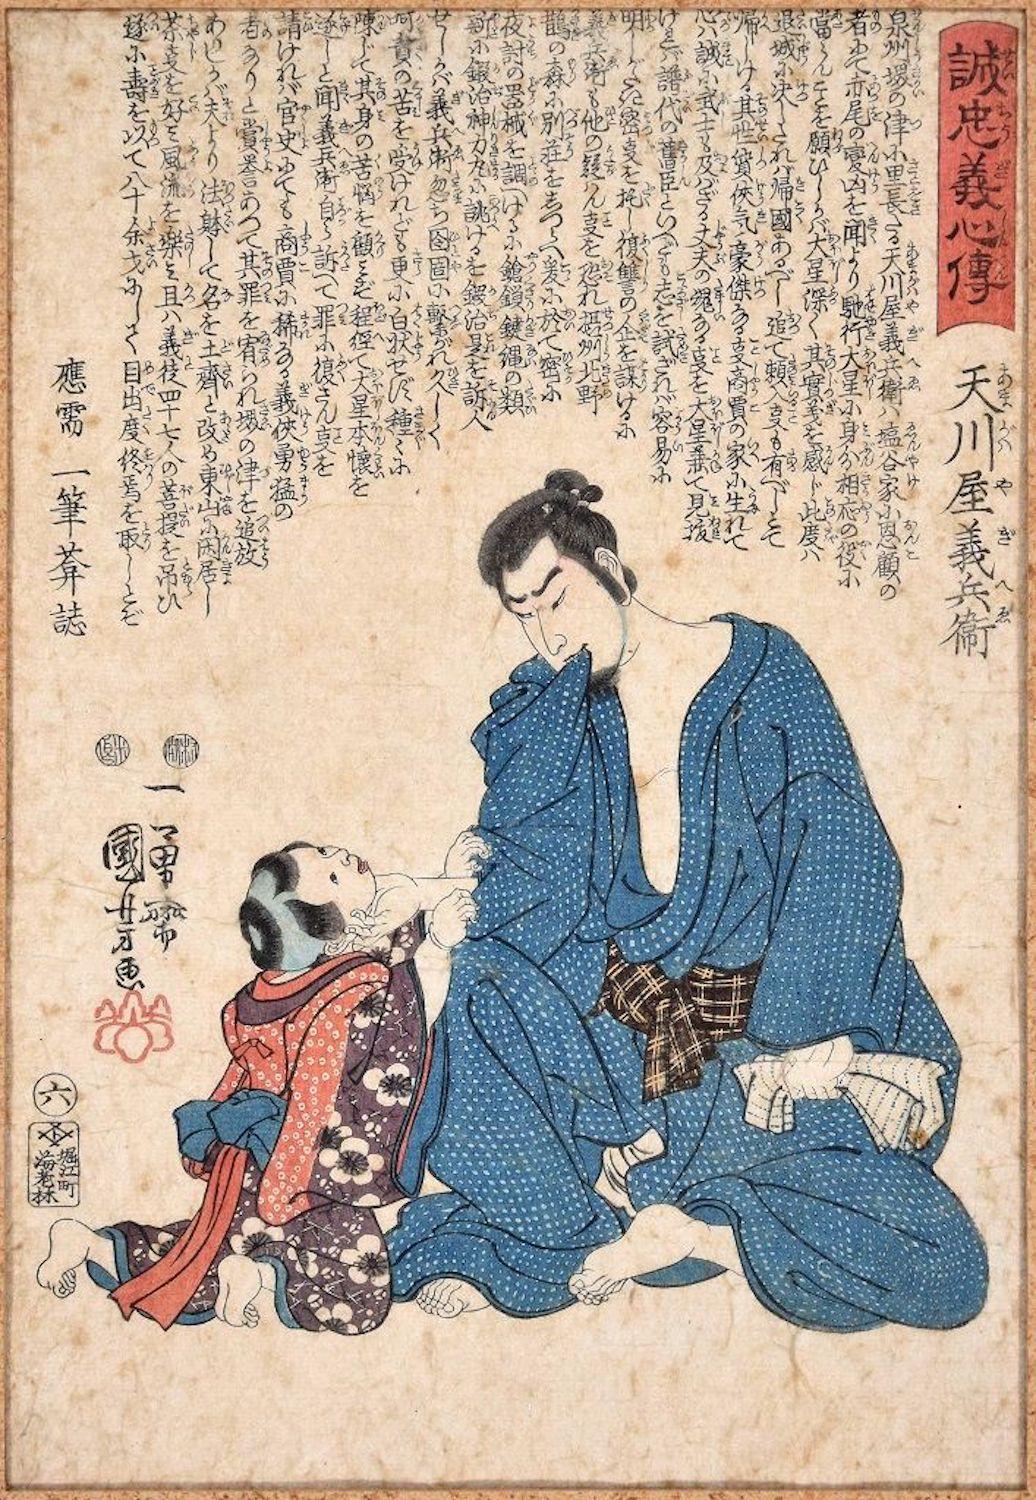 Image dimensions: 35 x 24.5 cm.

Faithful Hearts and True Loyalty is a wonderful color xylograph on paper realized by the talented Japanese master Utagawa Kuniyoshi (1798-1861).

This original print represents the "Seichugishinden" or "Stories of